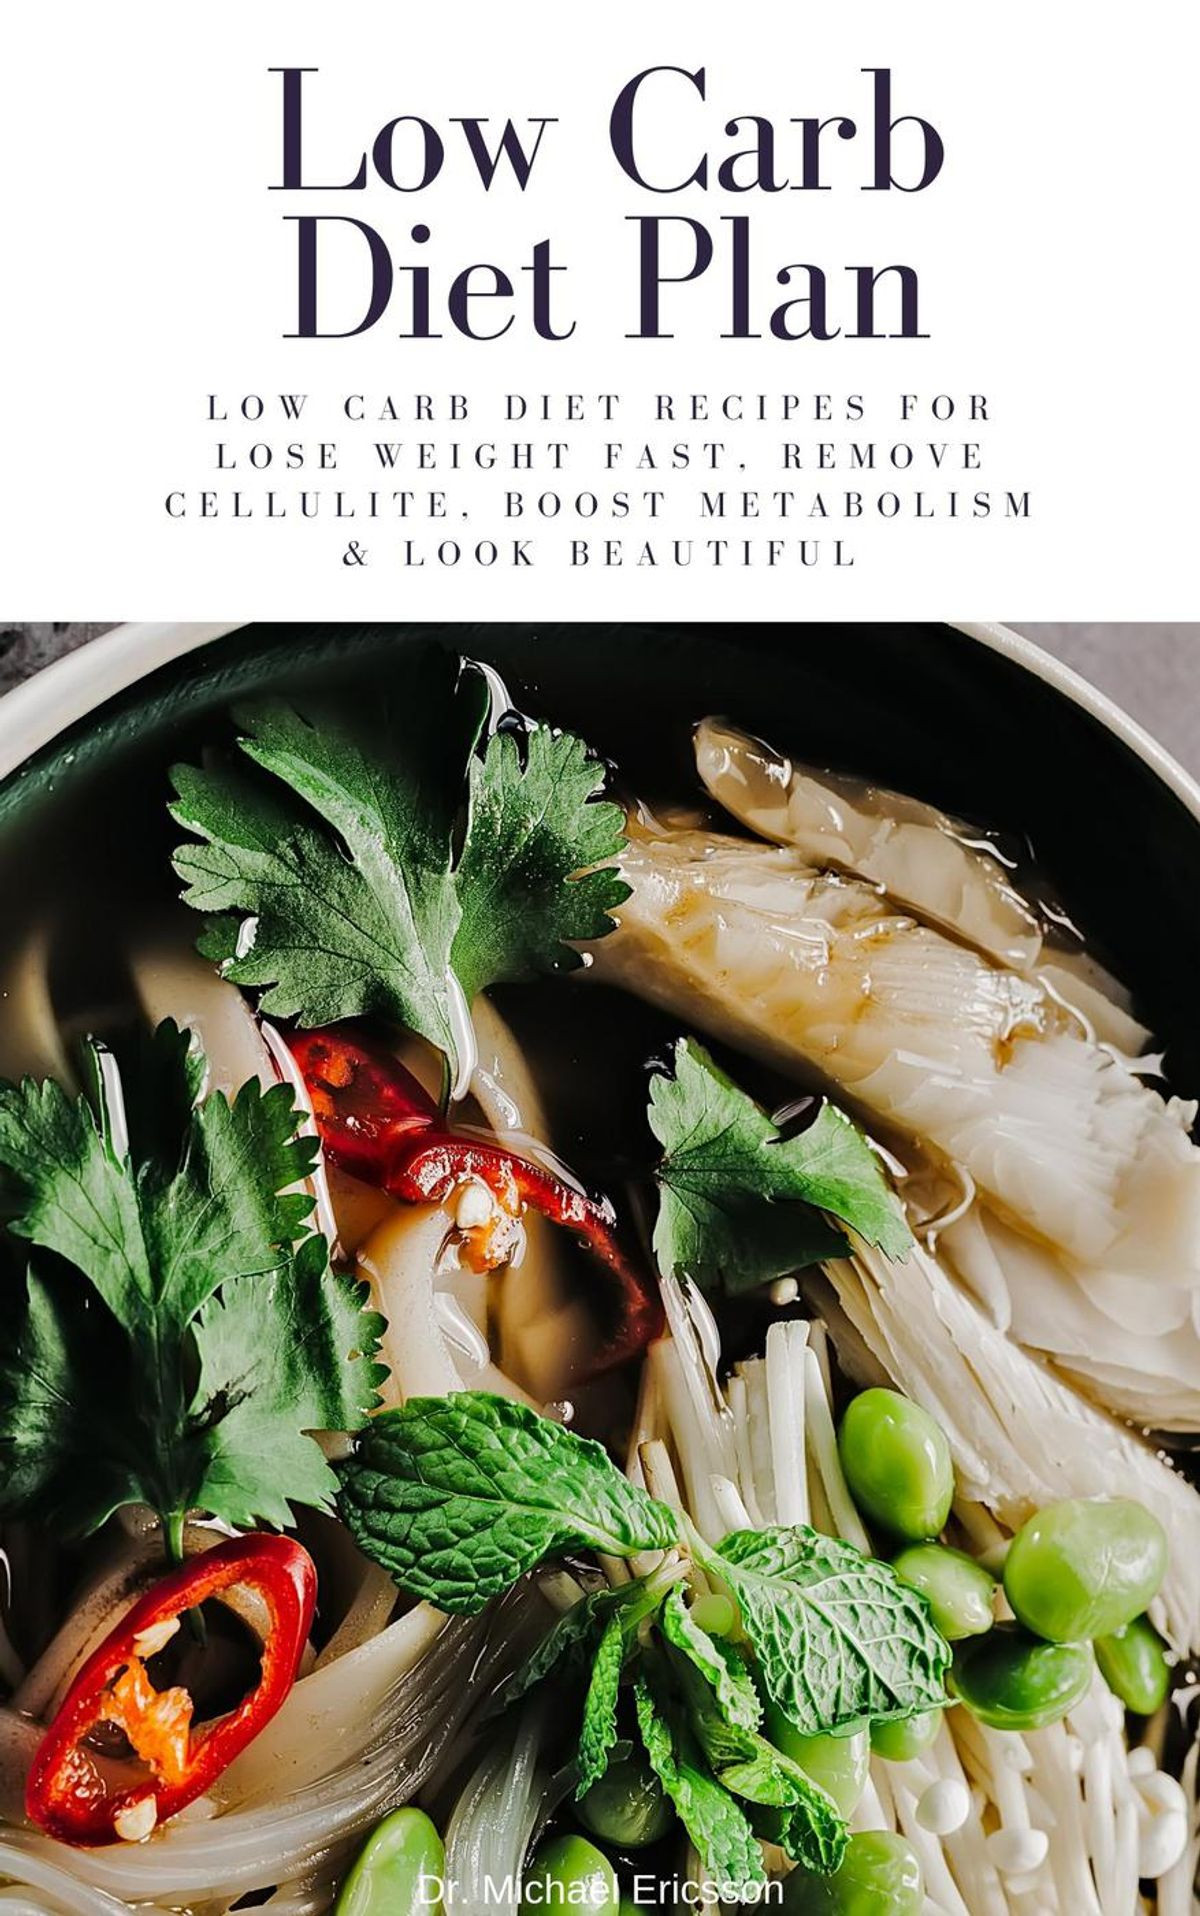 Low Carb Diet Plan To Lose Weight
 Low Carb Diet Plan Low Carb Diet Recipes For Lose Weight